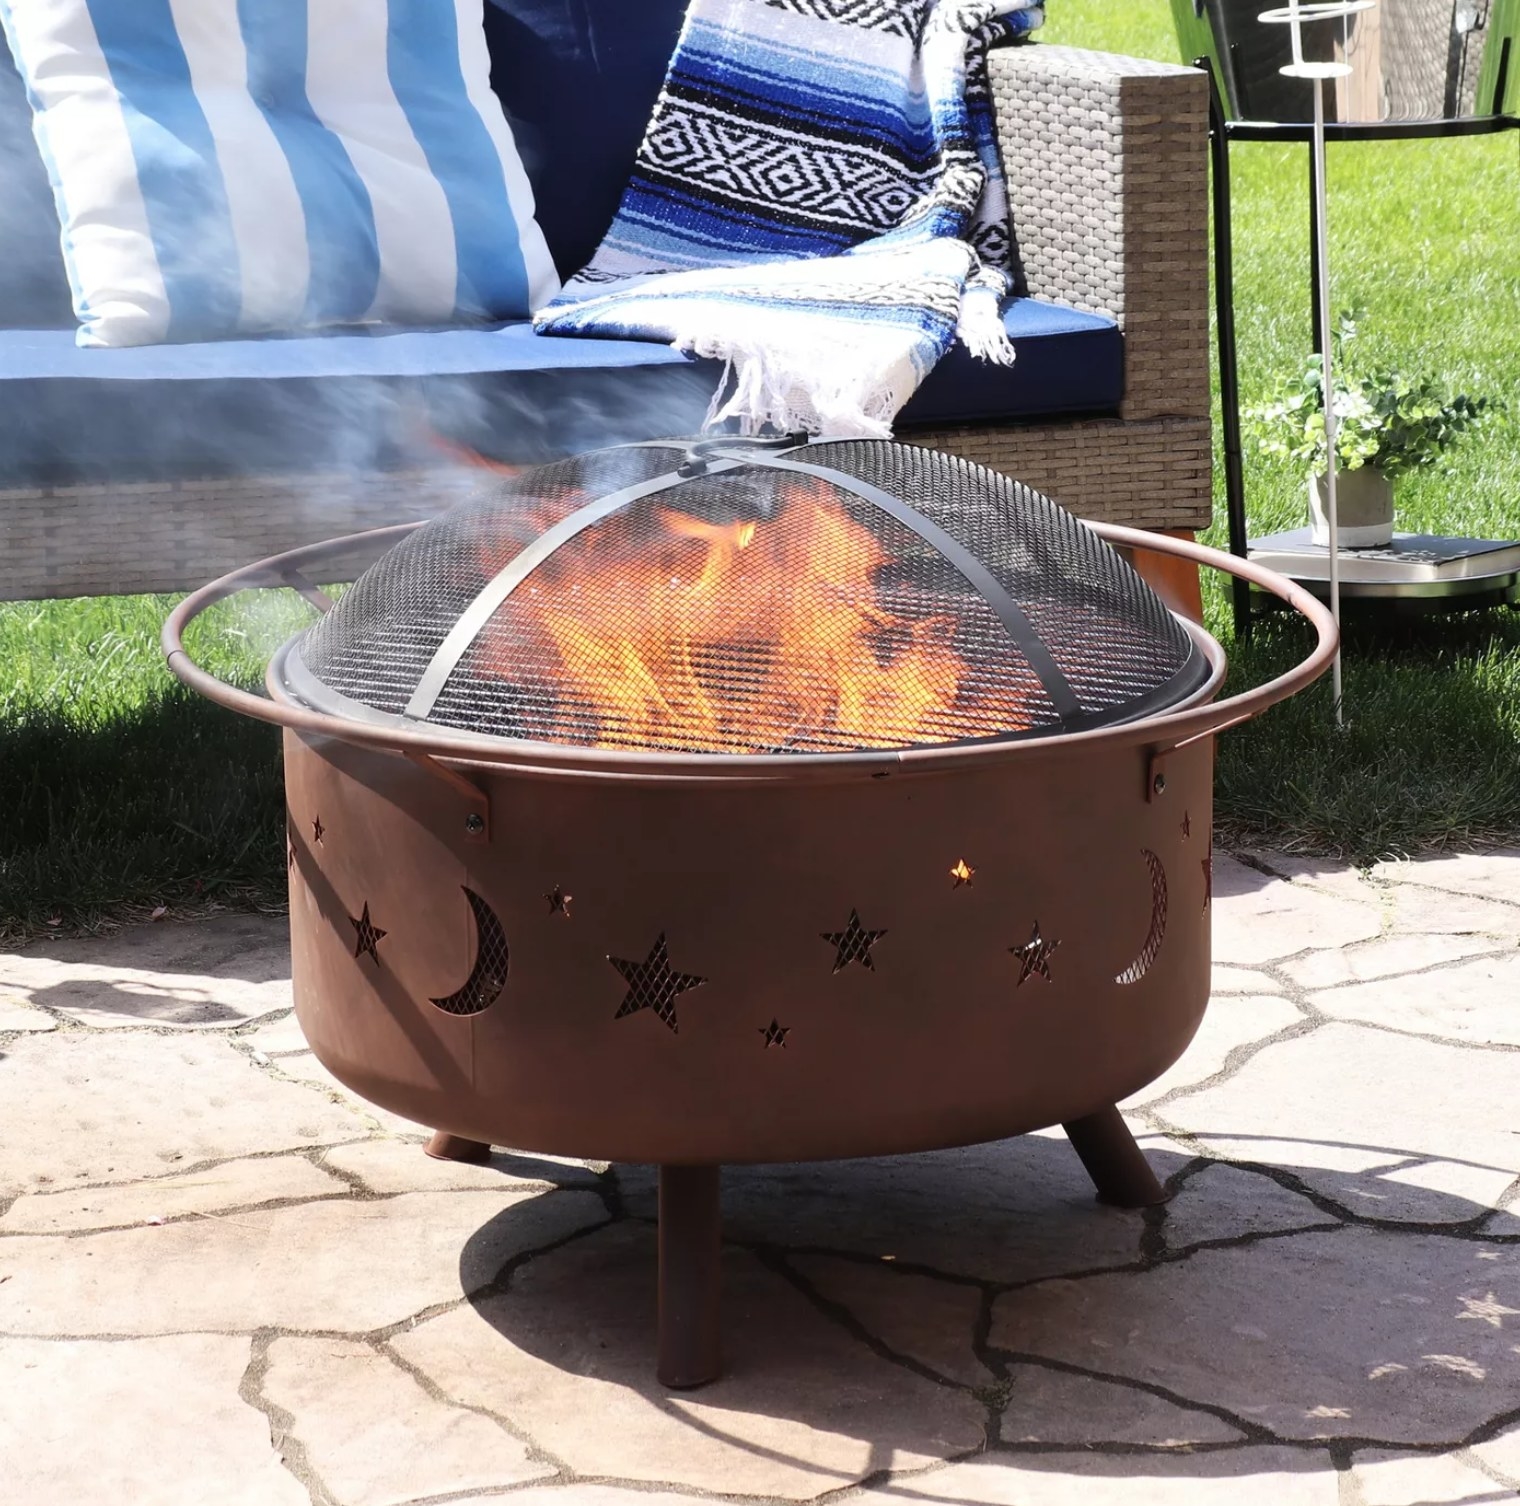 the metal fire pit with moon and star cutouts with a metal grate on top